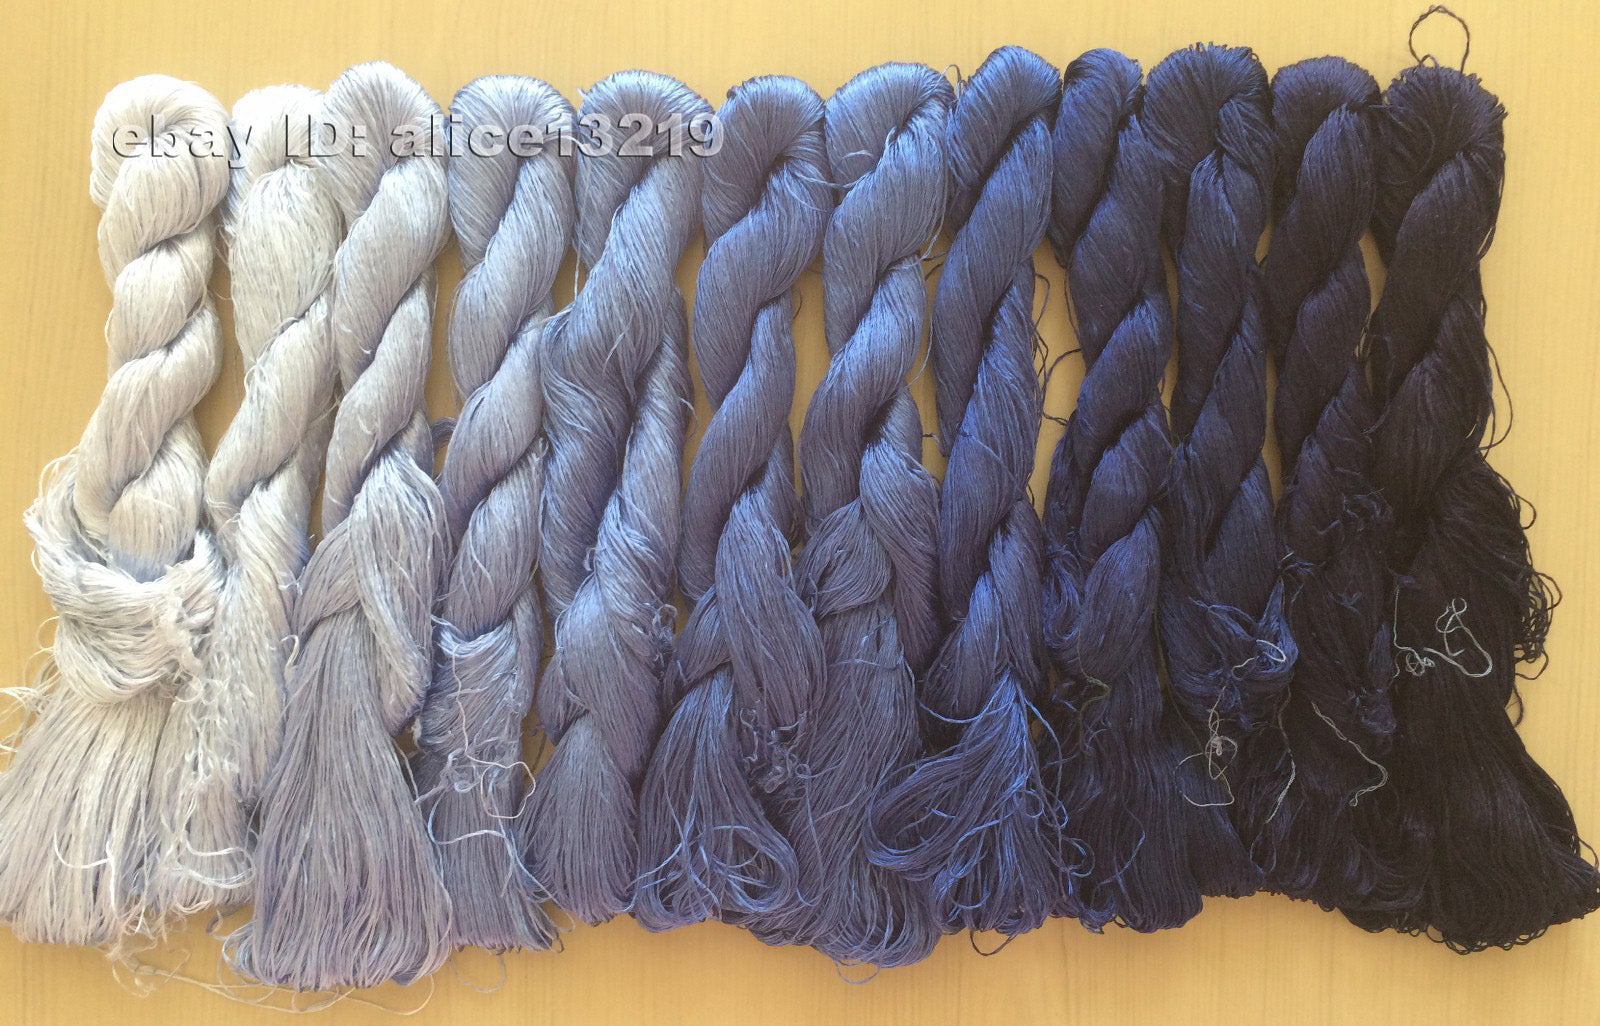 12bundles 100%real mulberry silk,hand-dyed embroidery silk floss/thread N20